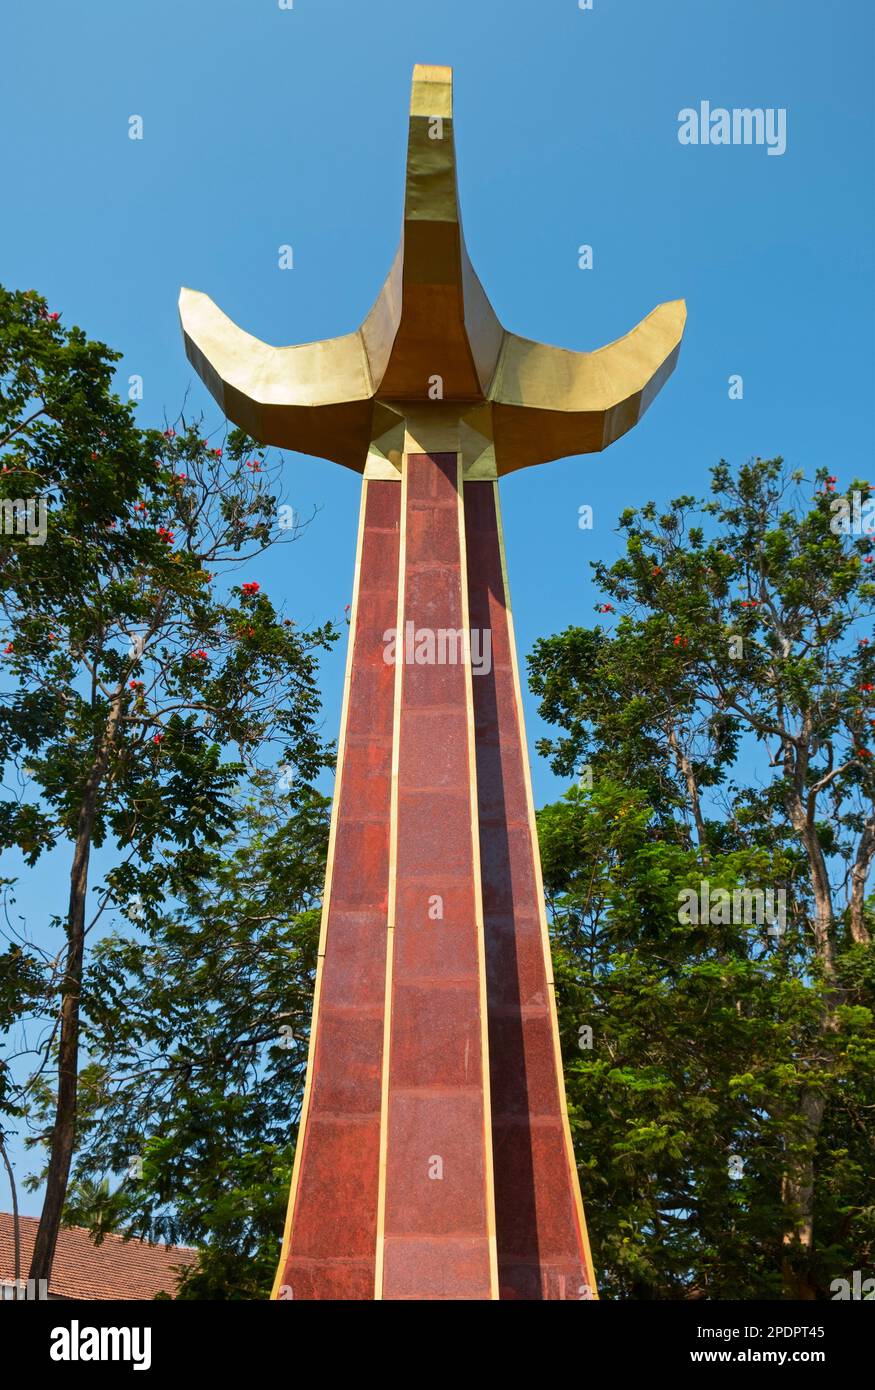 Memorial to the Martyrs of the freedom struggle against Portuguese colonial rule. Azad Maidan. Panjim Goa India Stock Photo